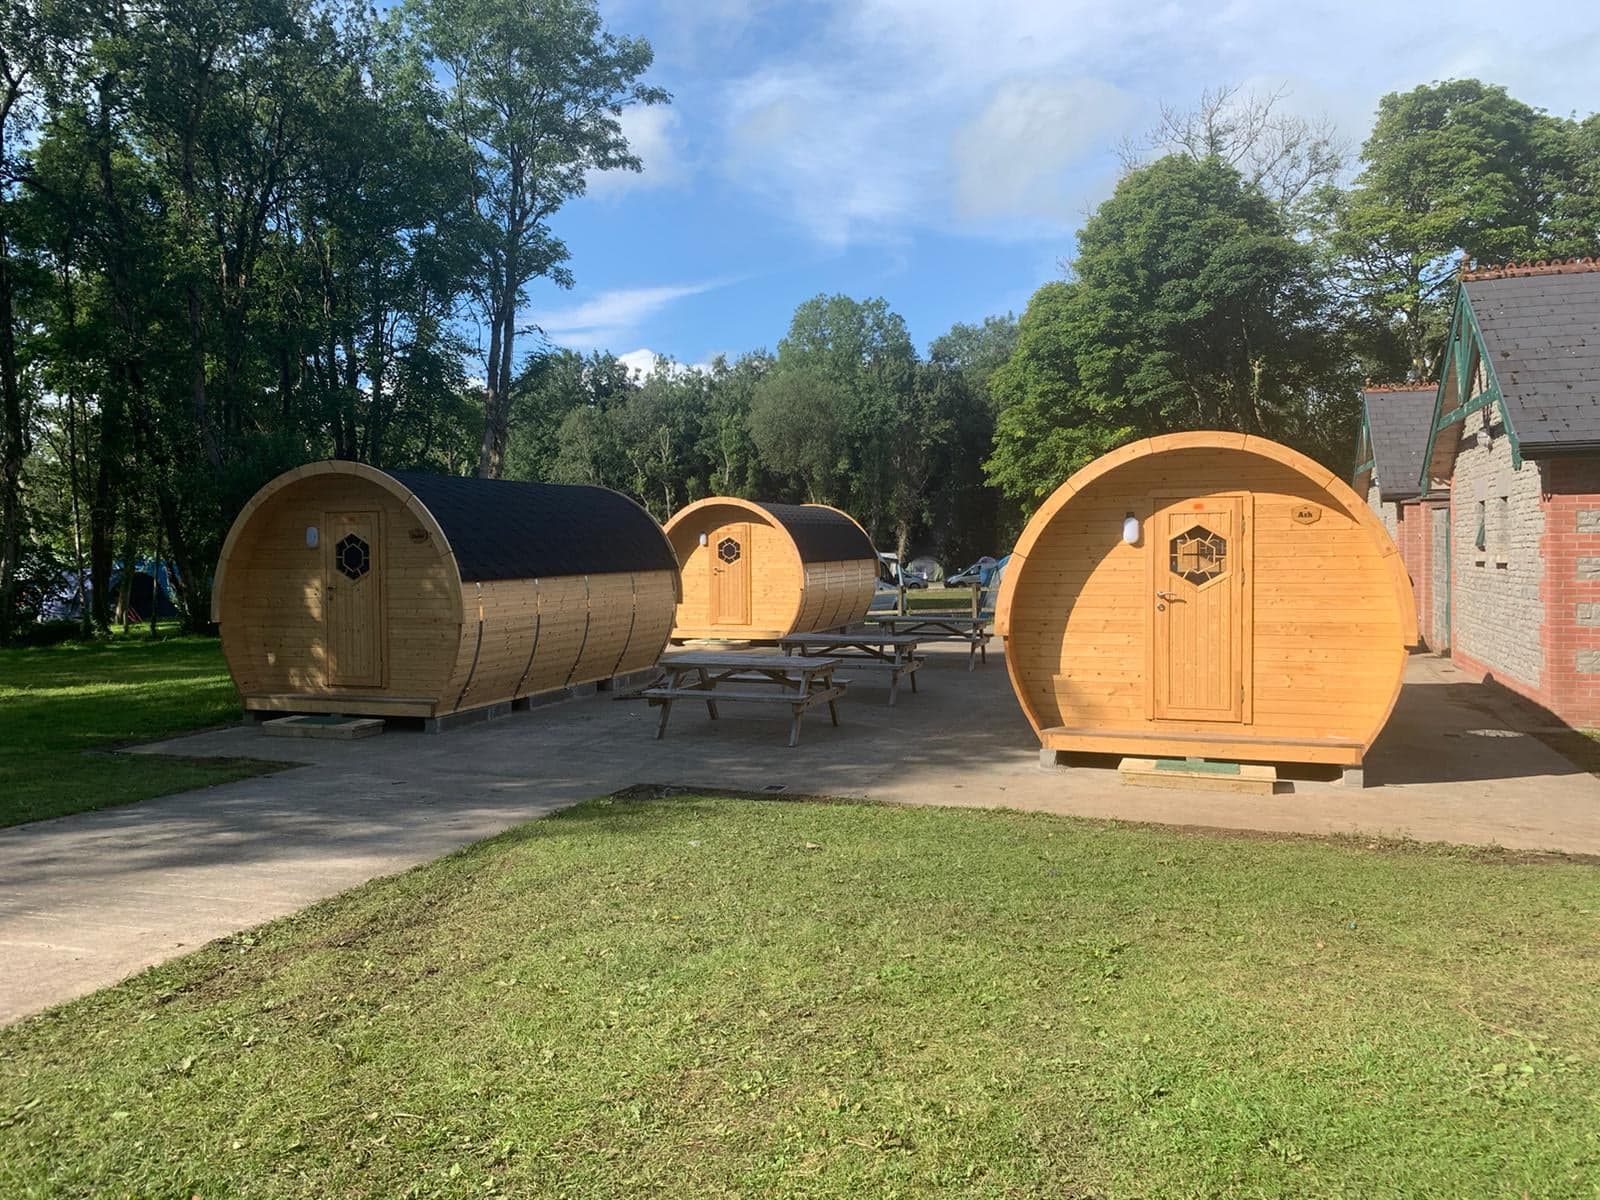 Castle Archdale Log Pods CampingNI